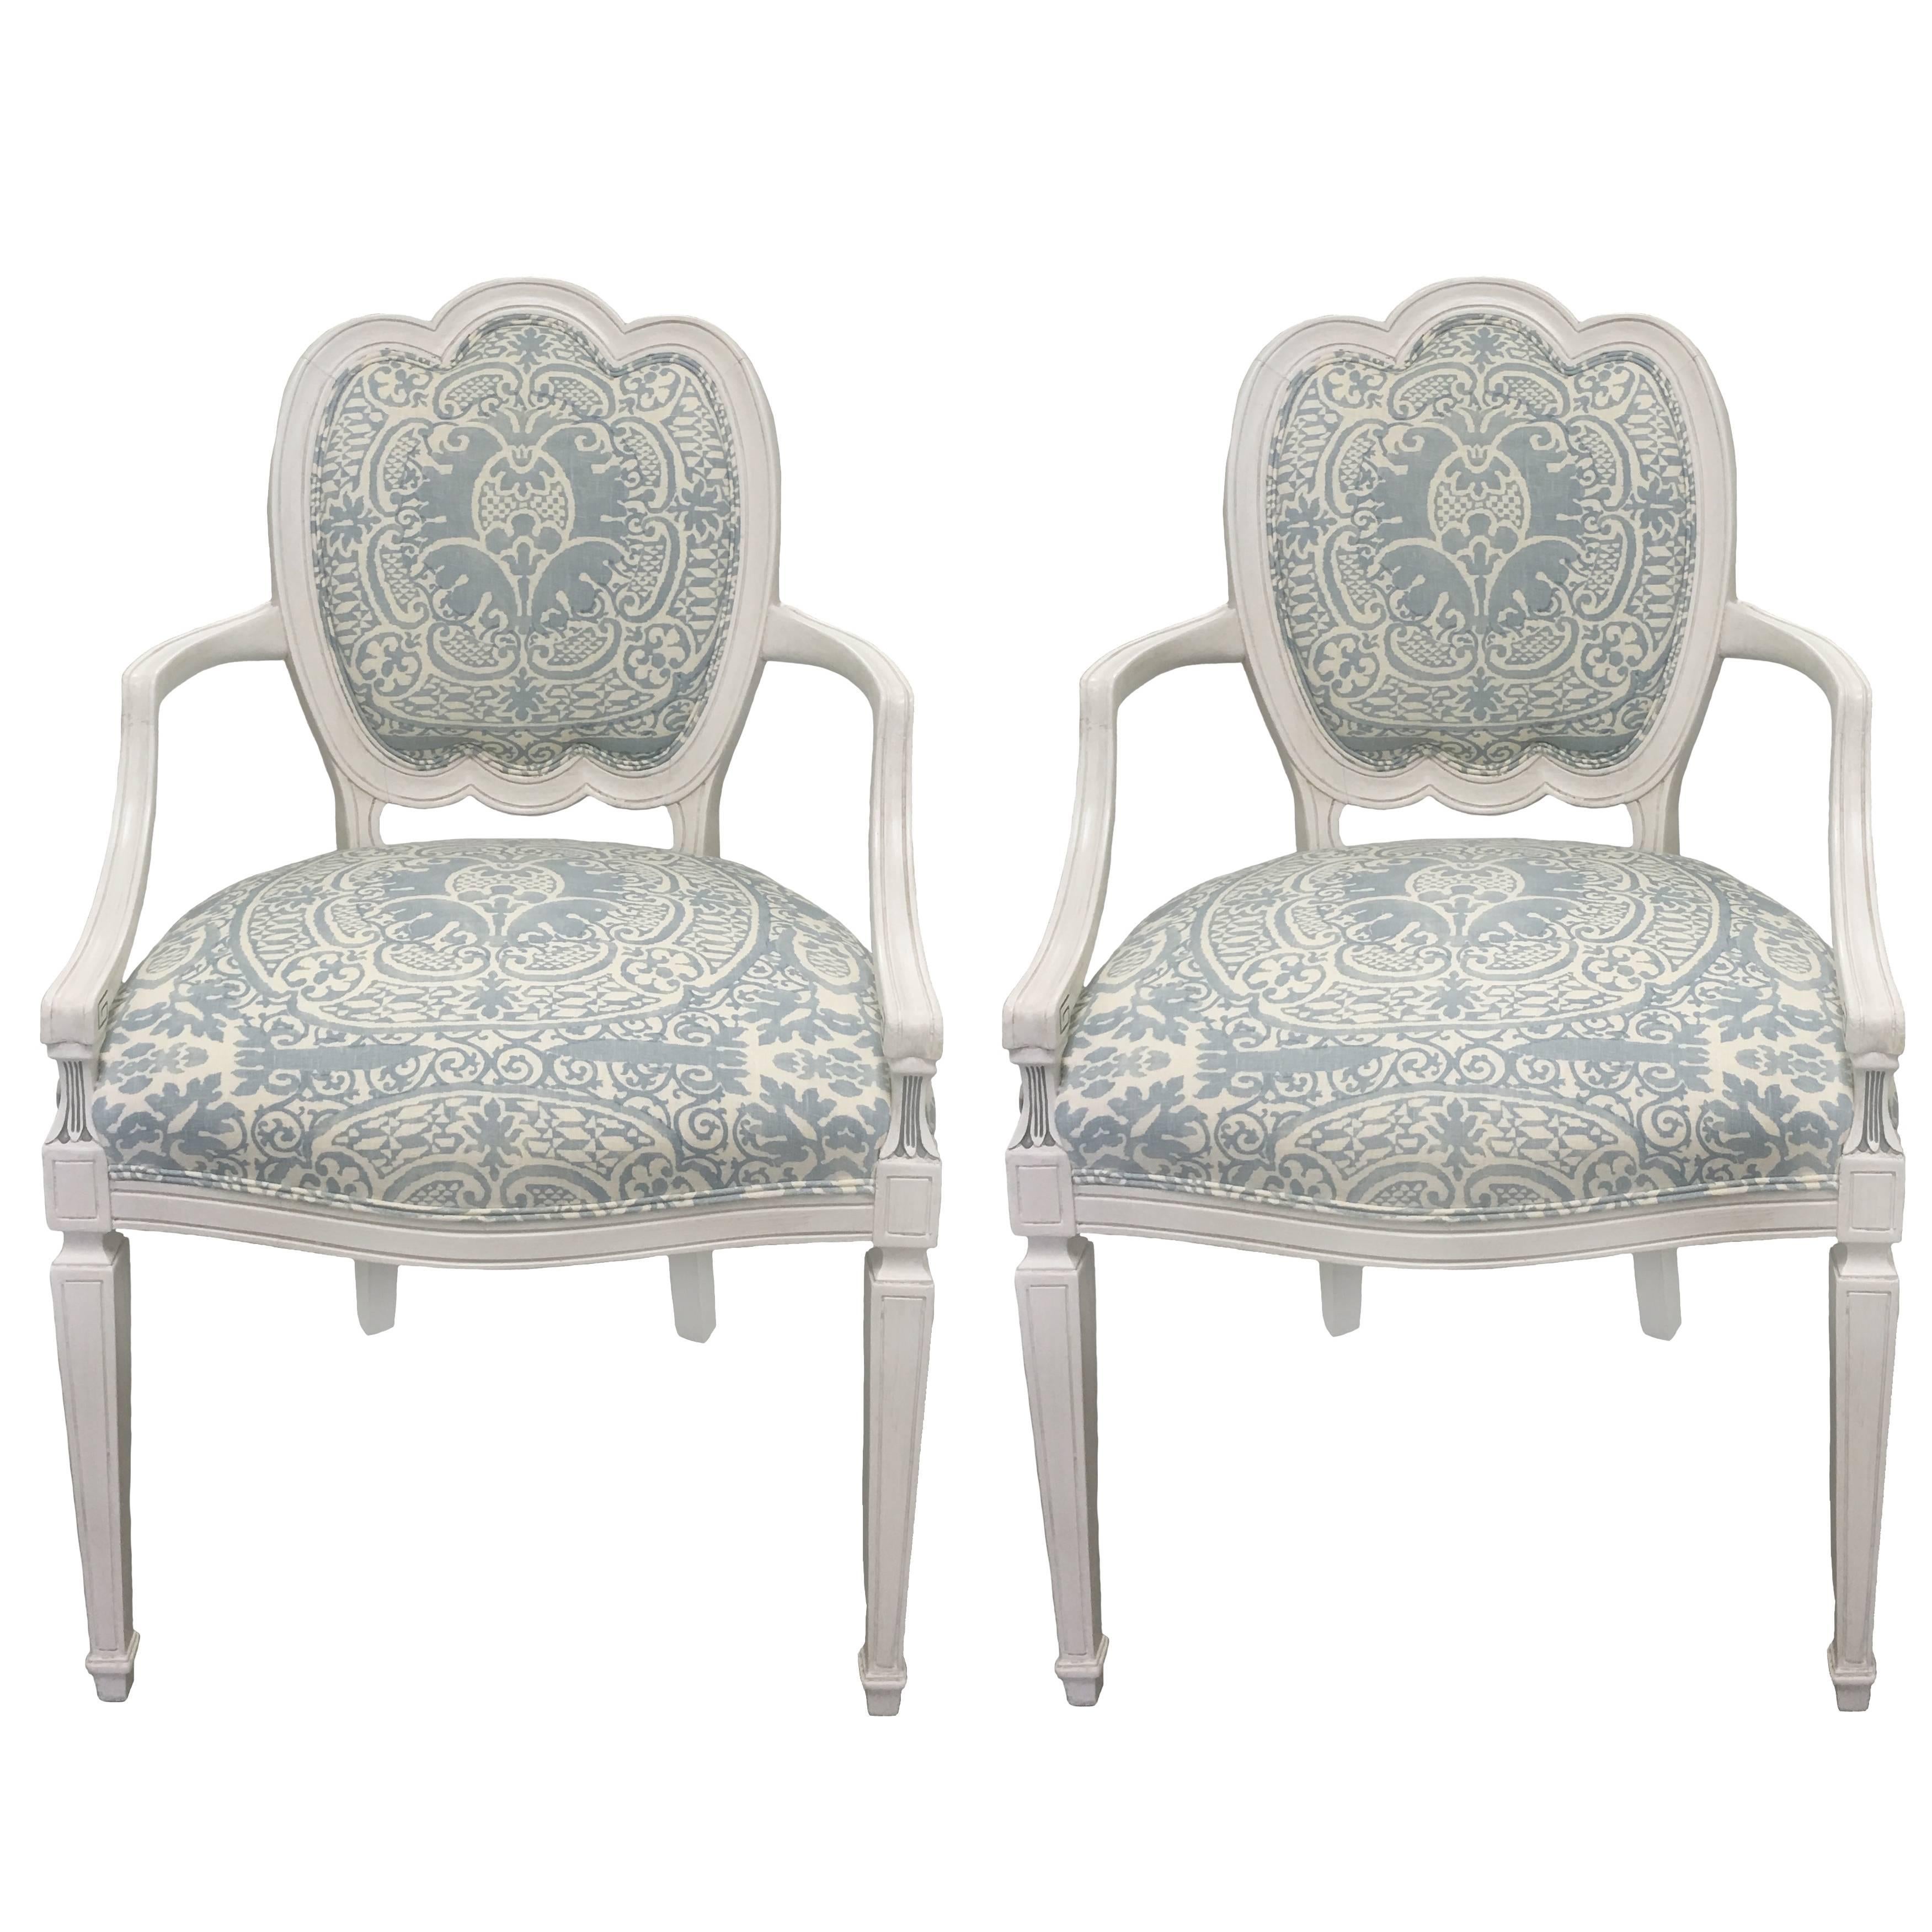 Pair of White Hepplewhite Style Quadrille Upholstered Armchairs